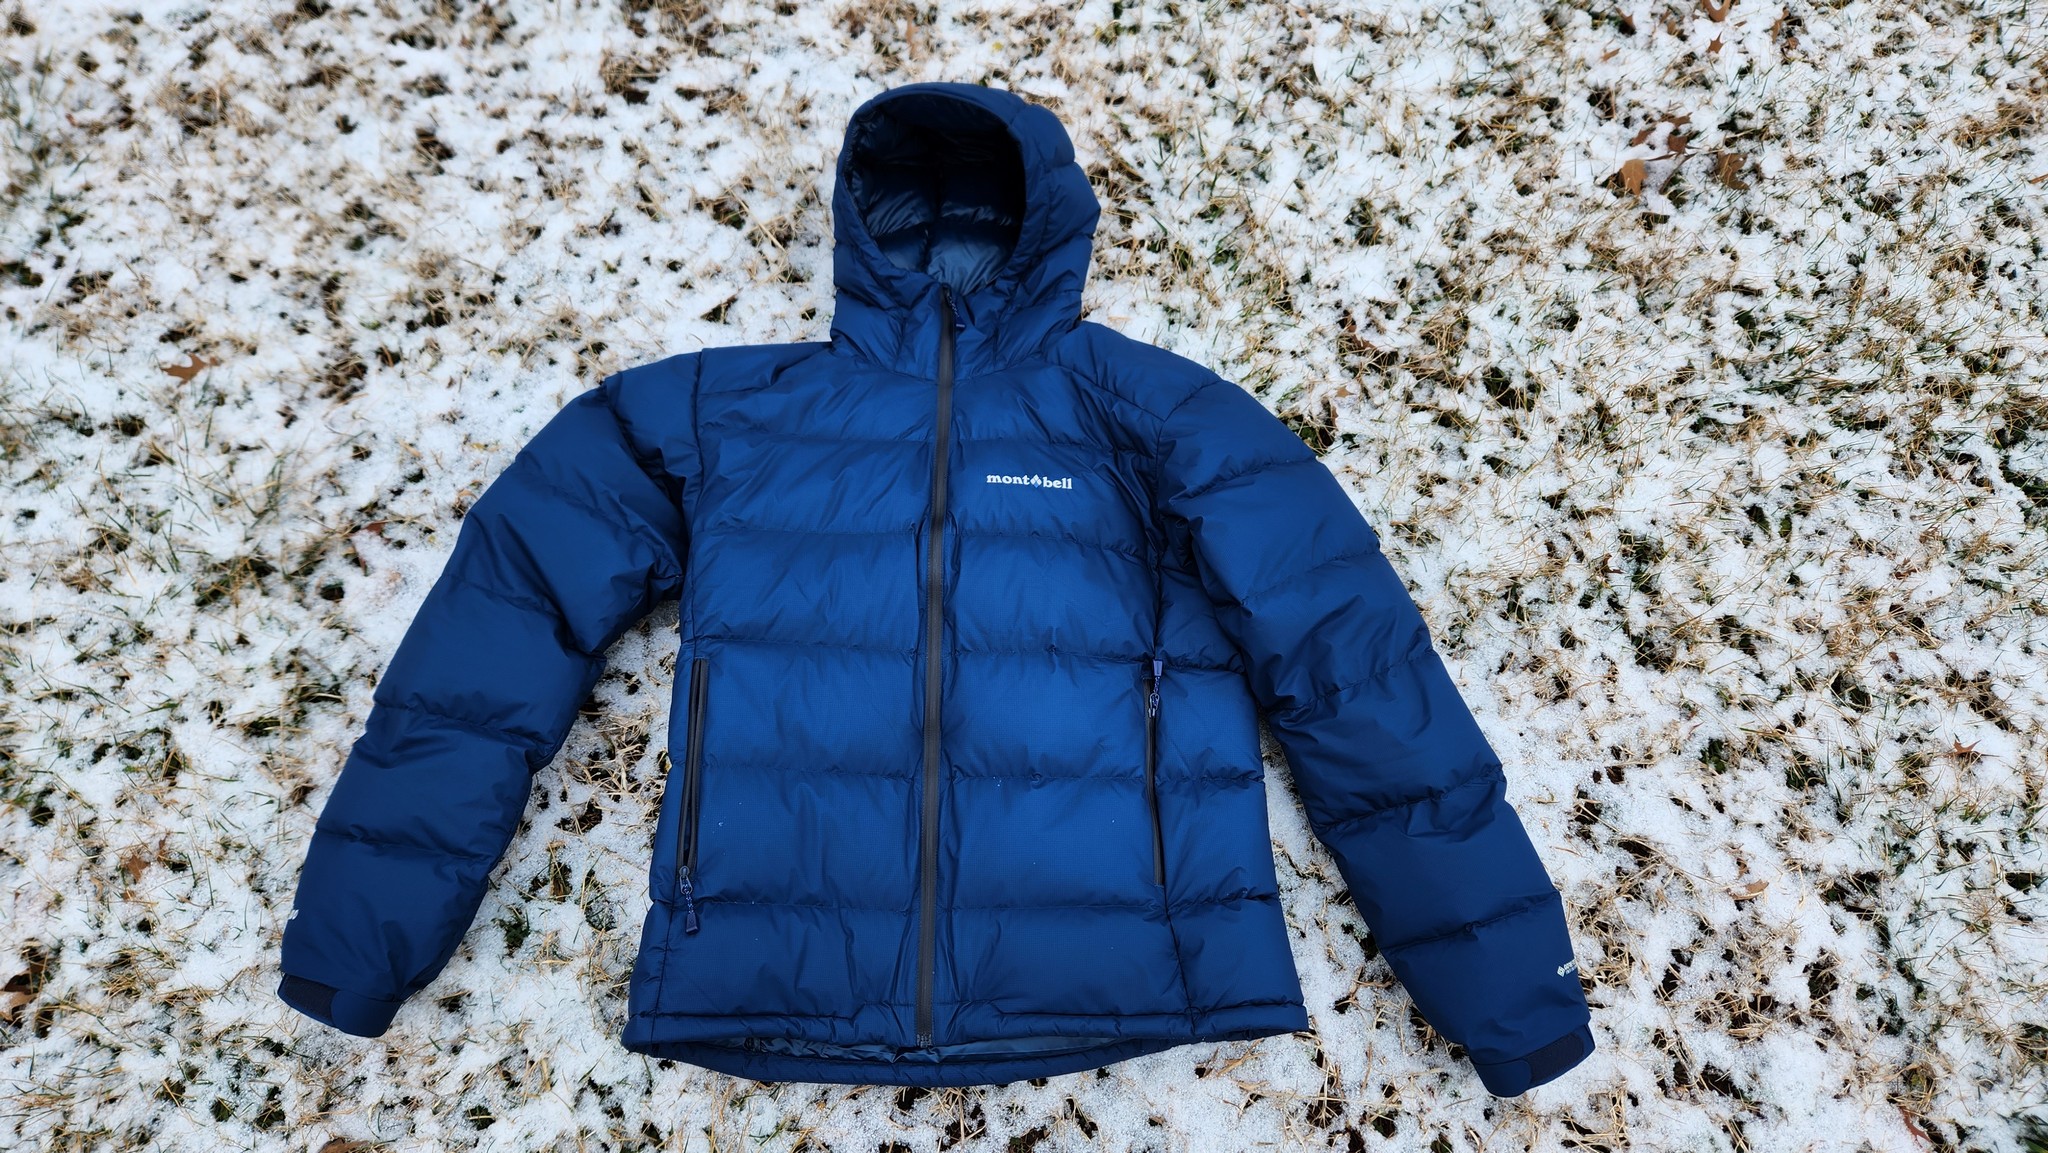 Montbell Permafrost Light Down Jacket review: A Windproof mobile ...